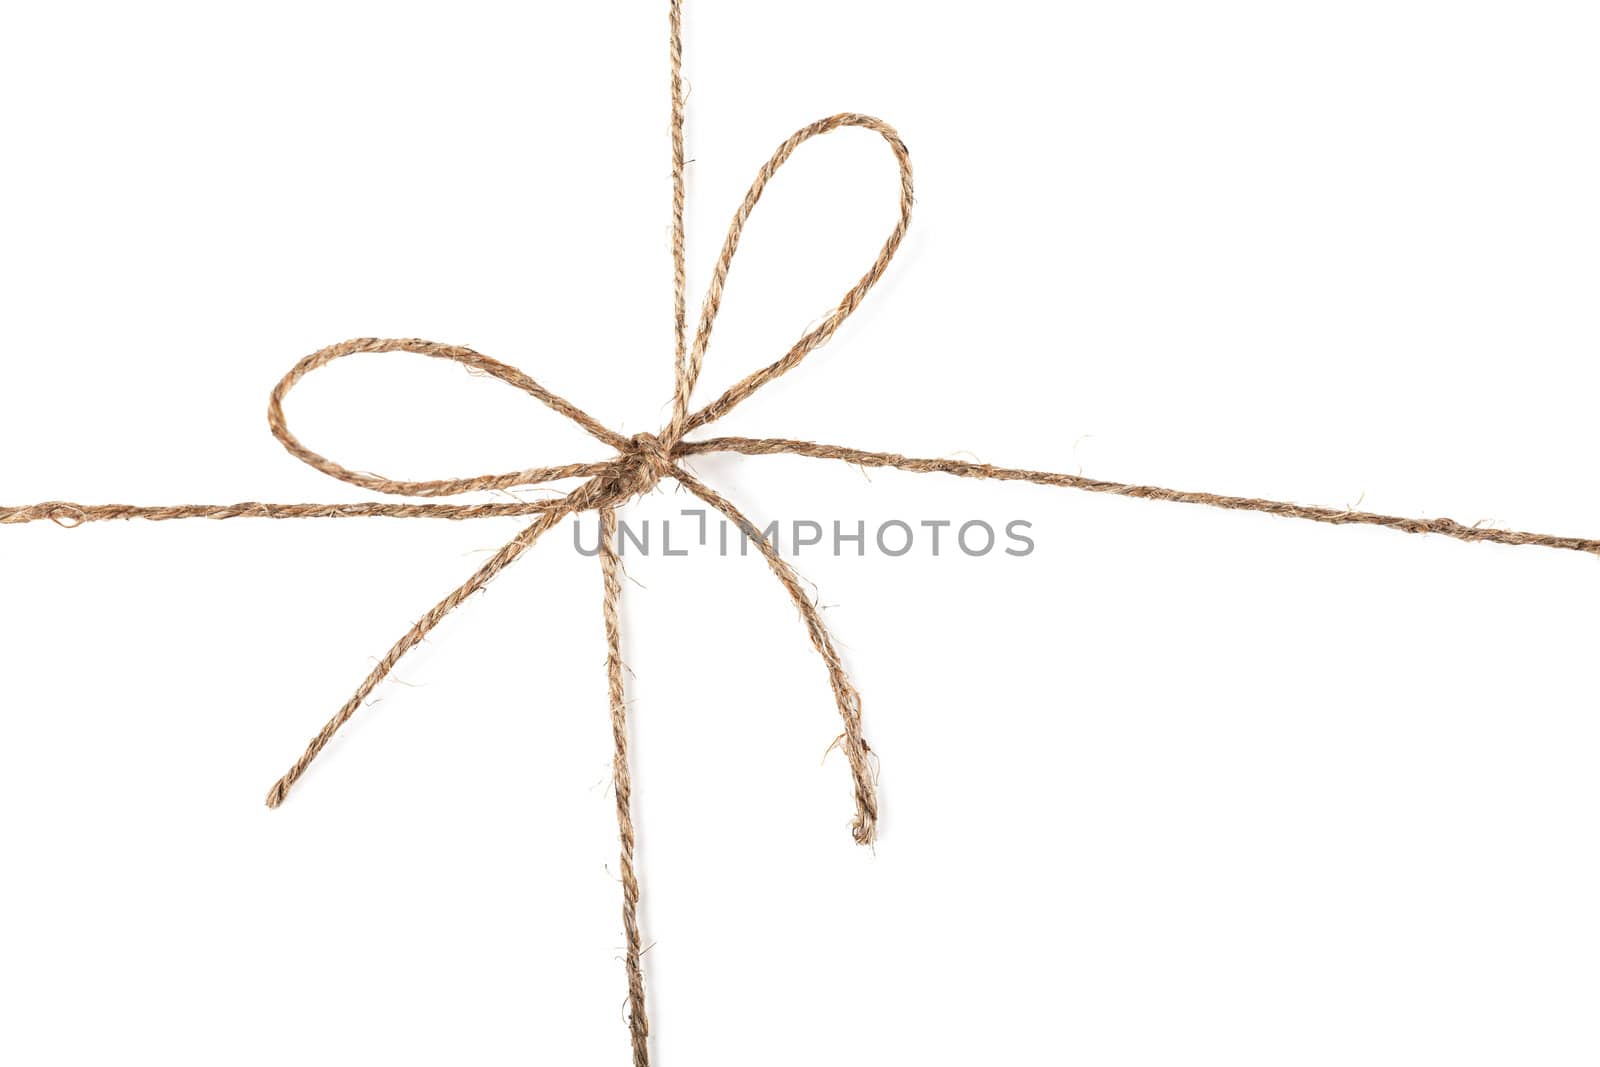 Closeup view of string knot over white background